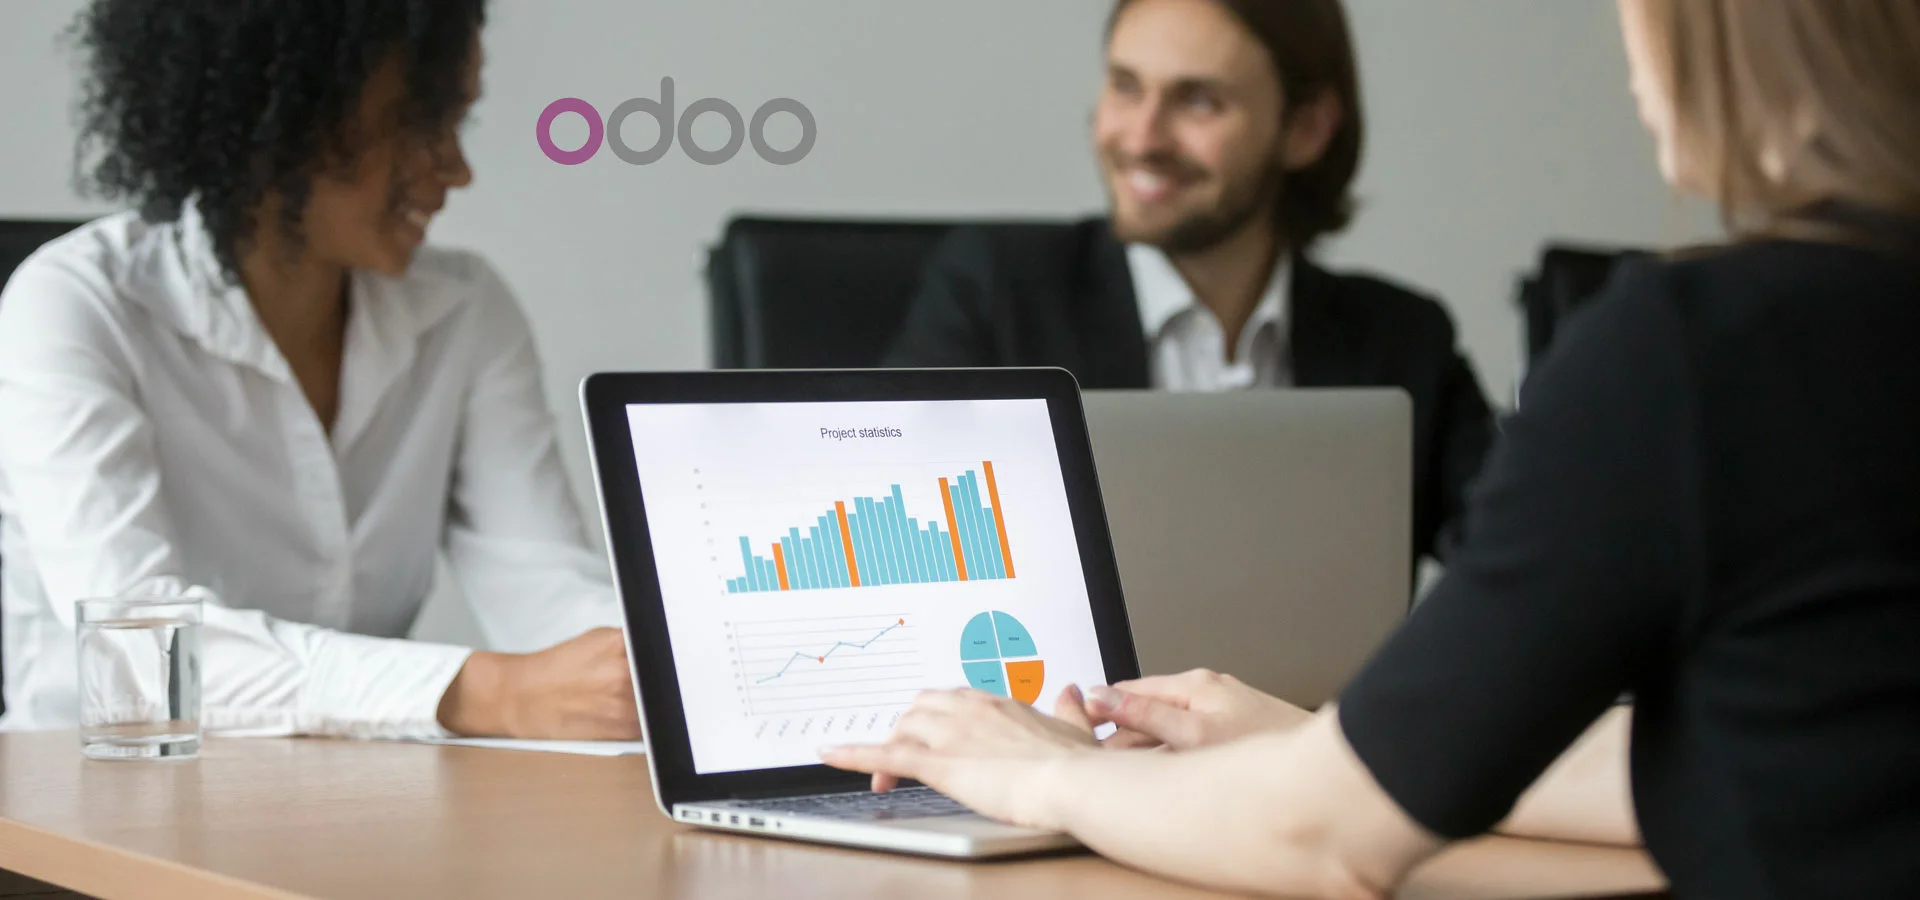 odoo-erp-support-and-services-related-blog-80